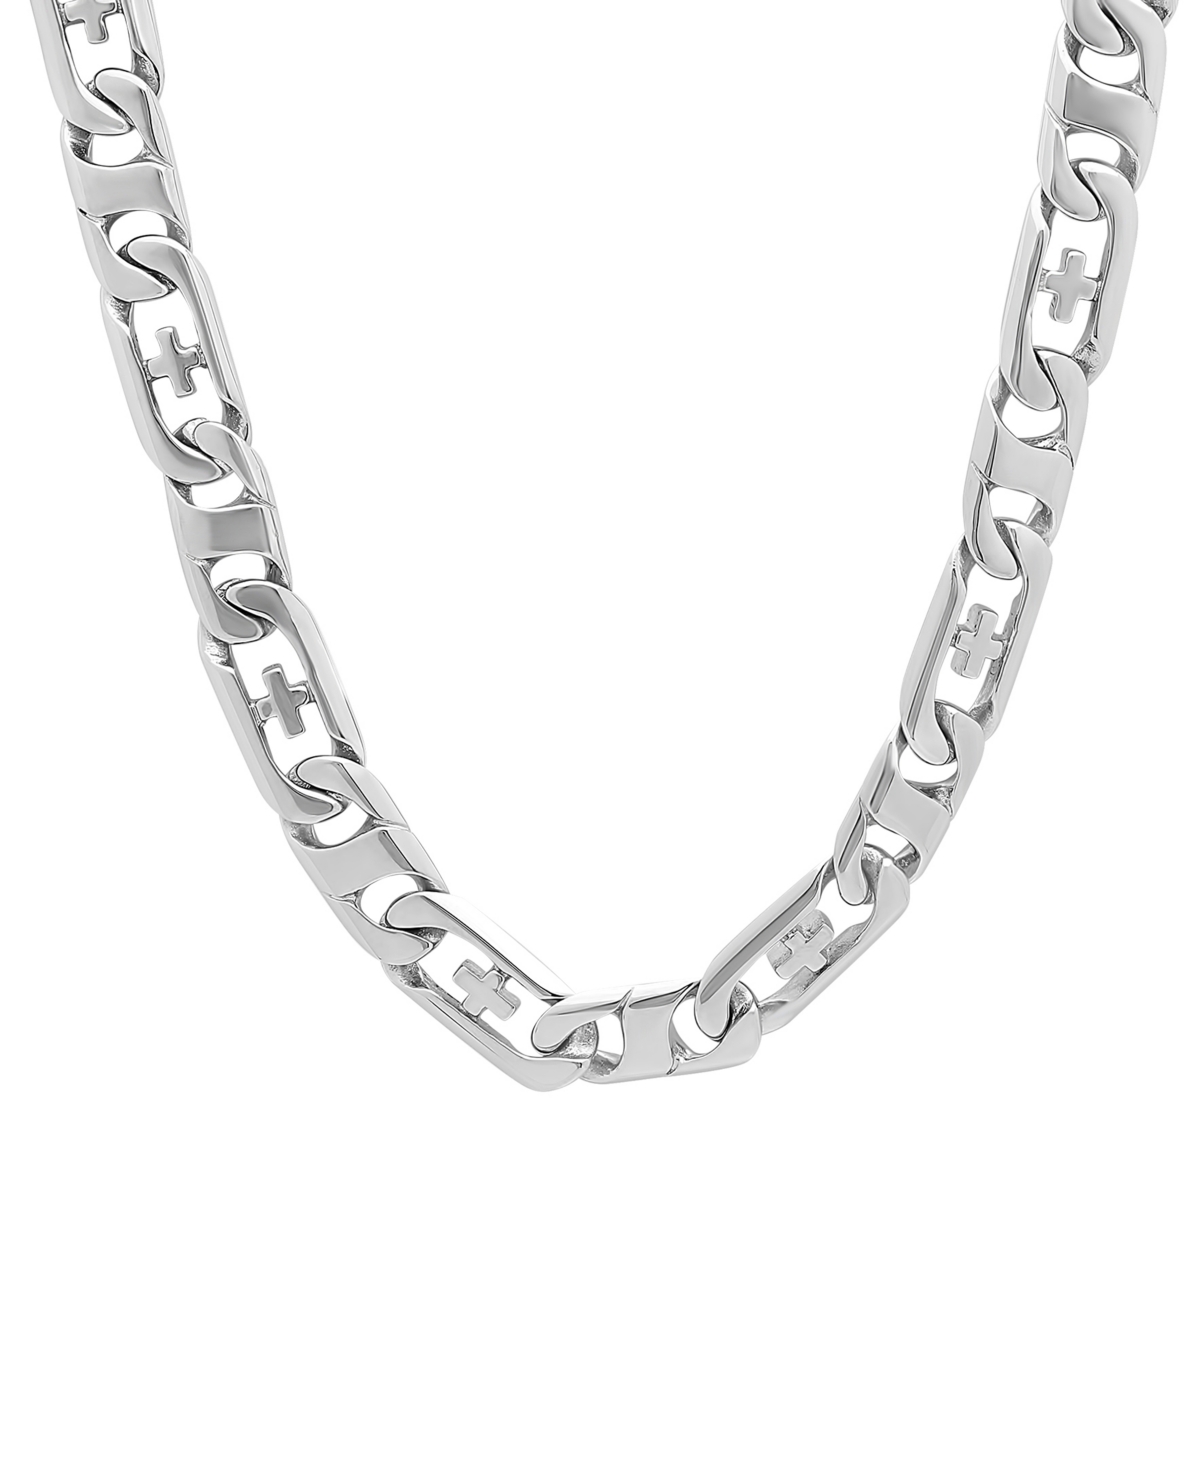 C & c Jewelry Macy's Men's Curb Link Chain Necklace in Stainless Steel